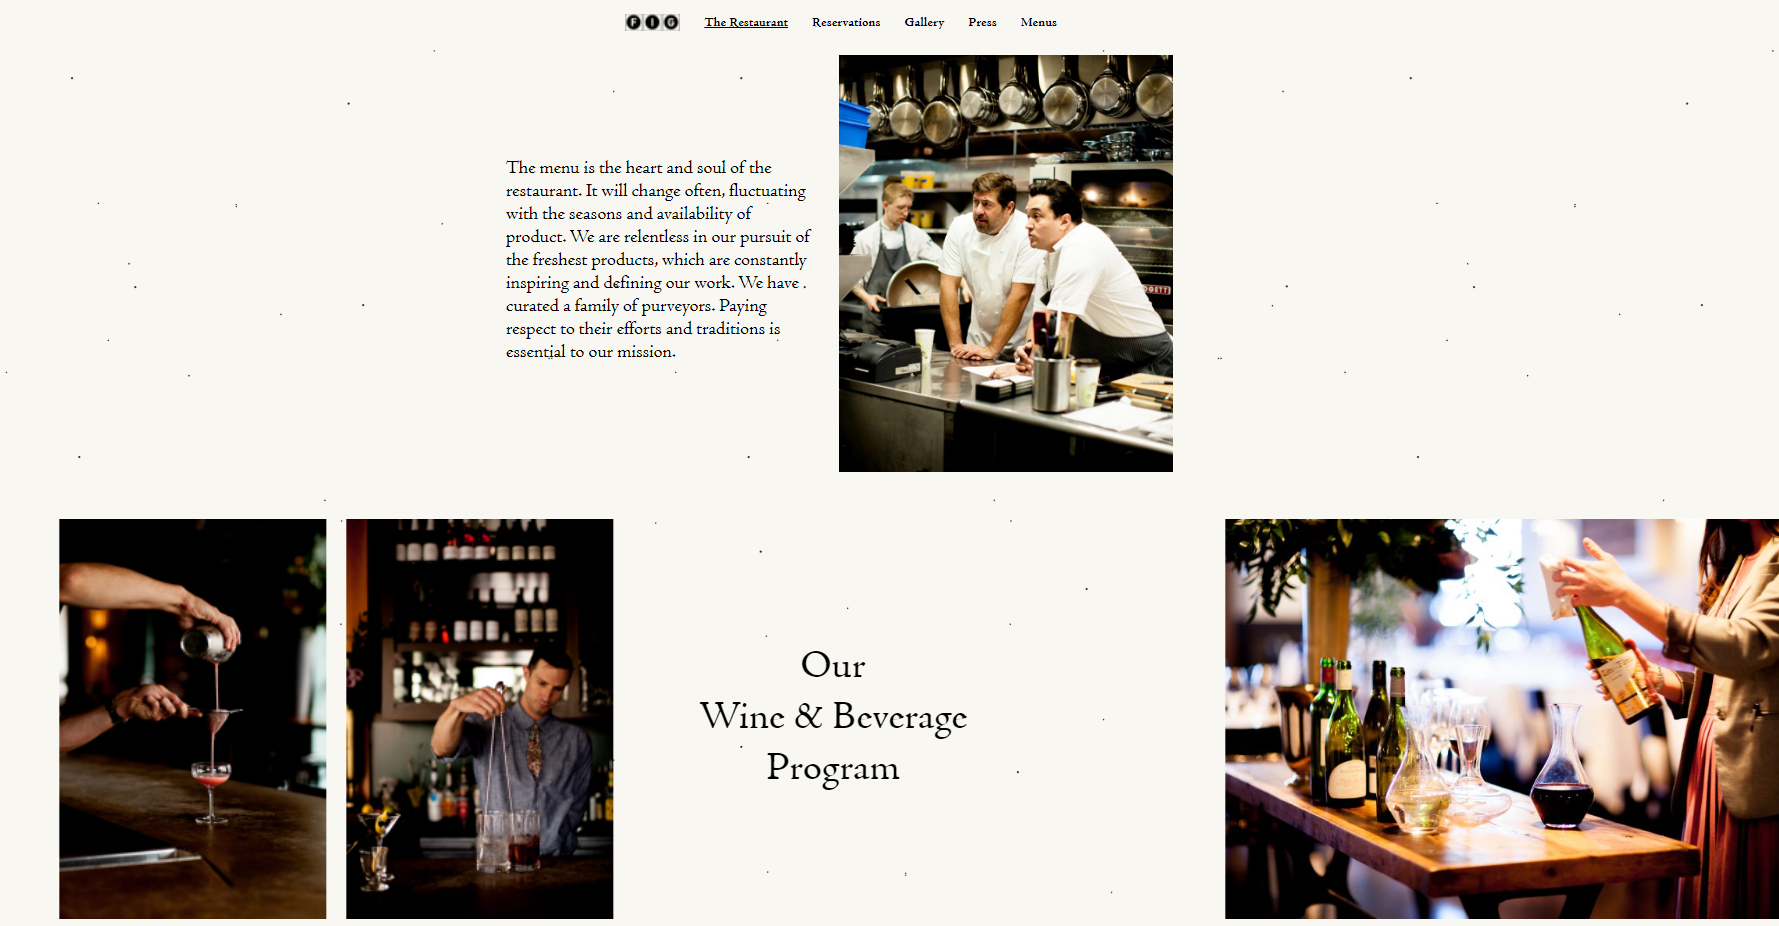 The FIG restaurant website is clear and rich in photos which makes it pleasant to browse it